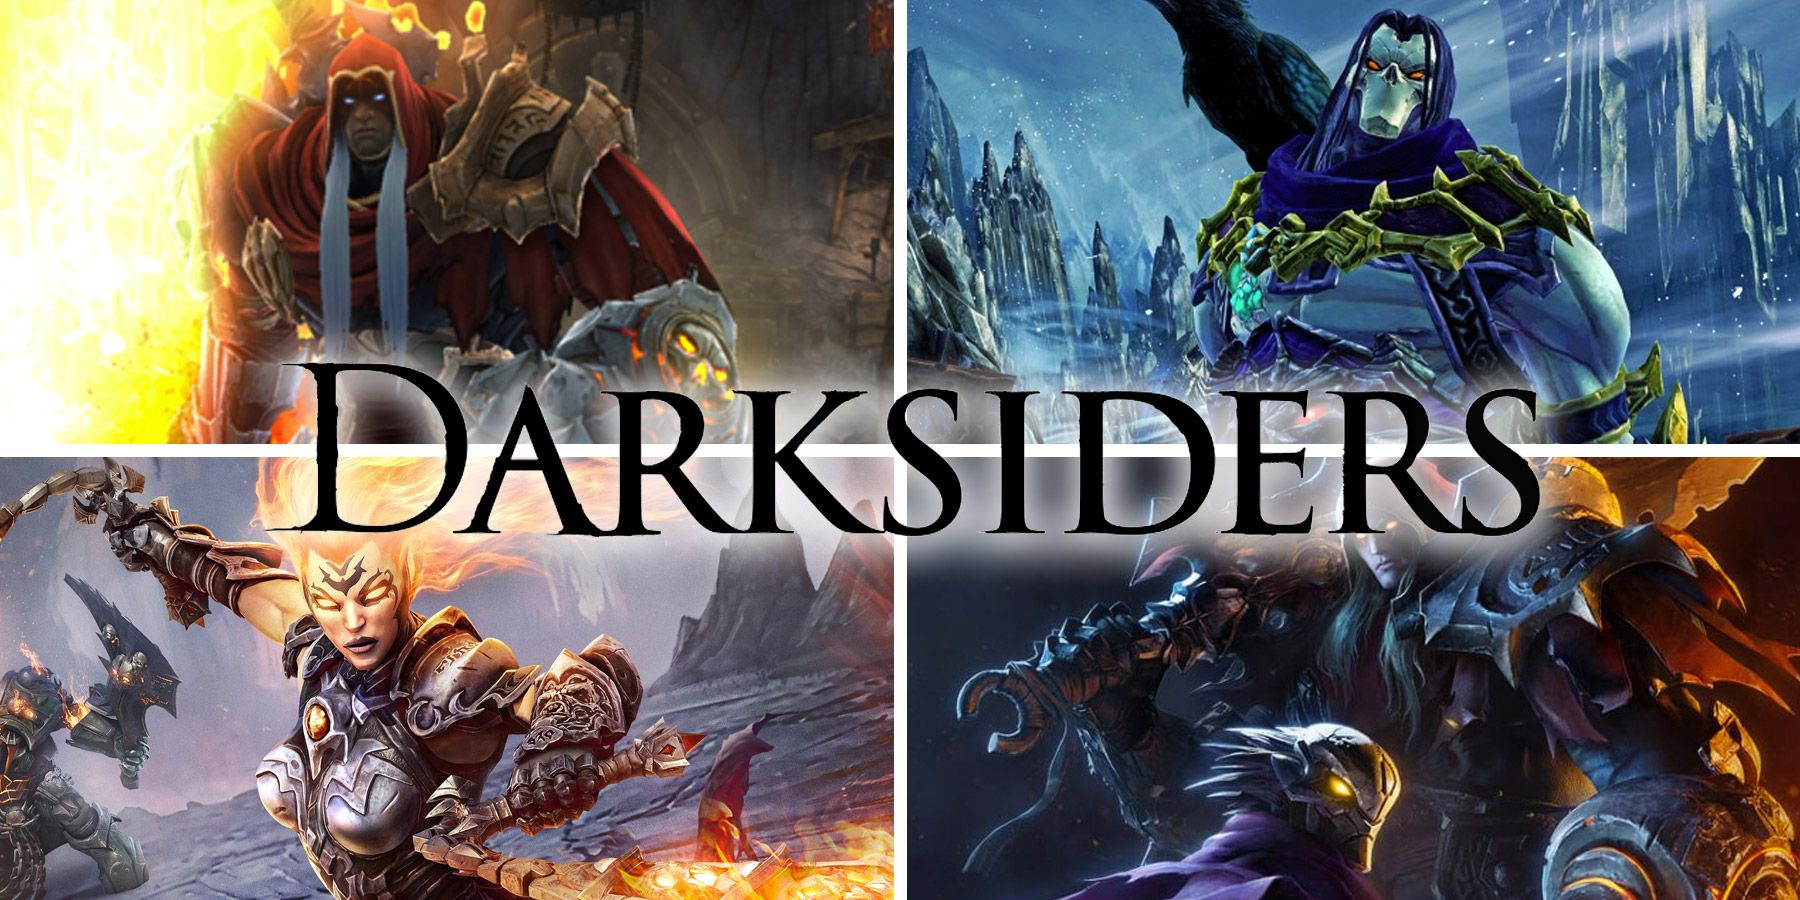 Time For Another Darksiders Game